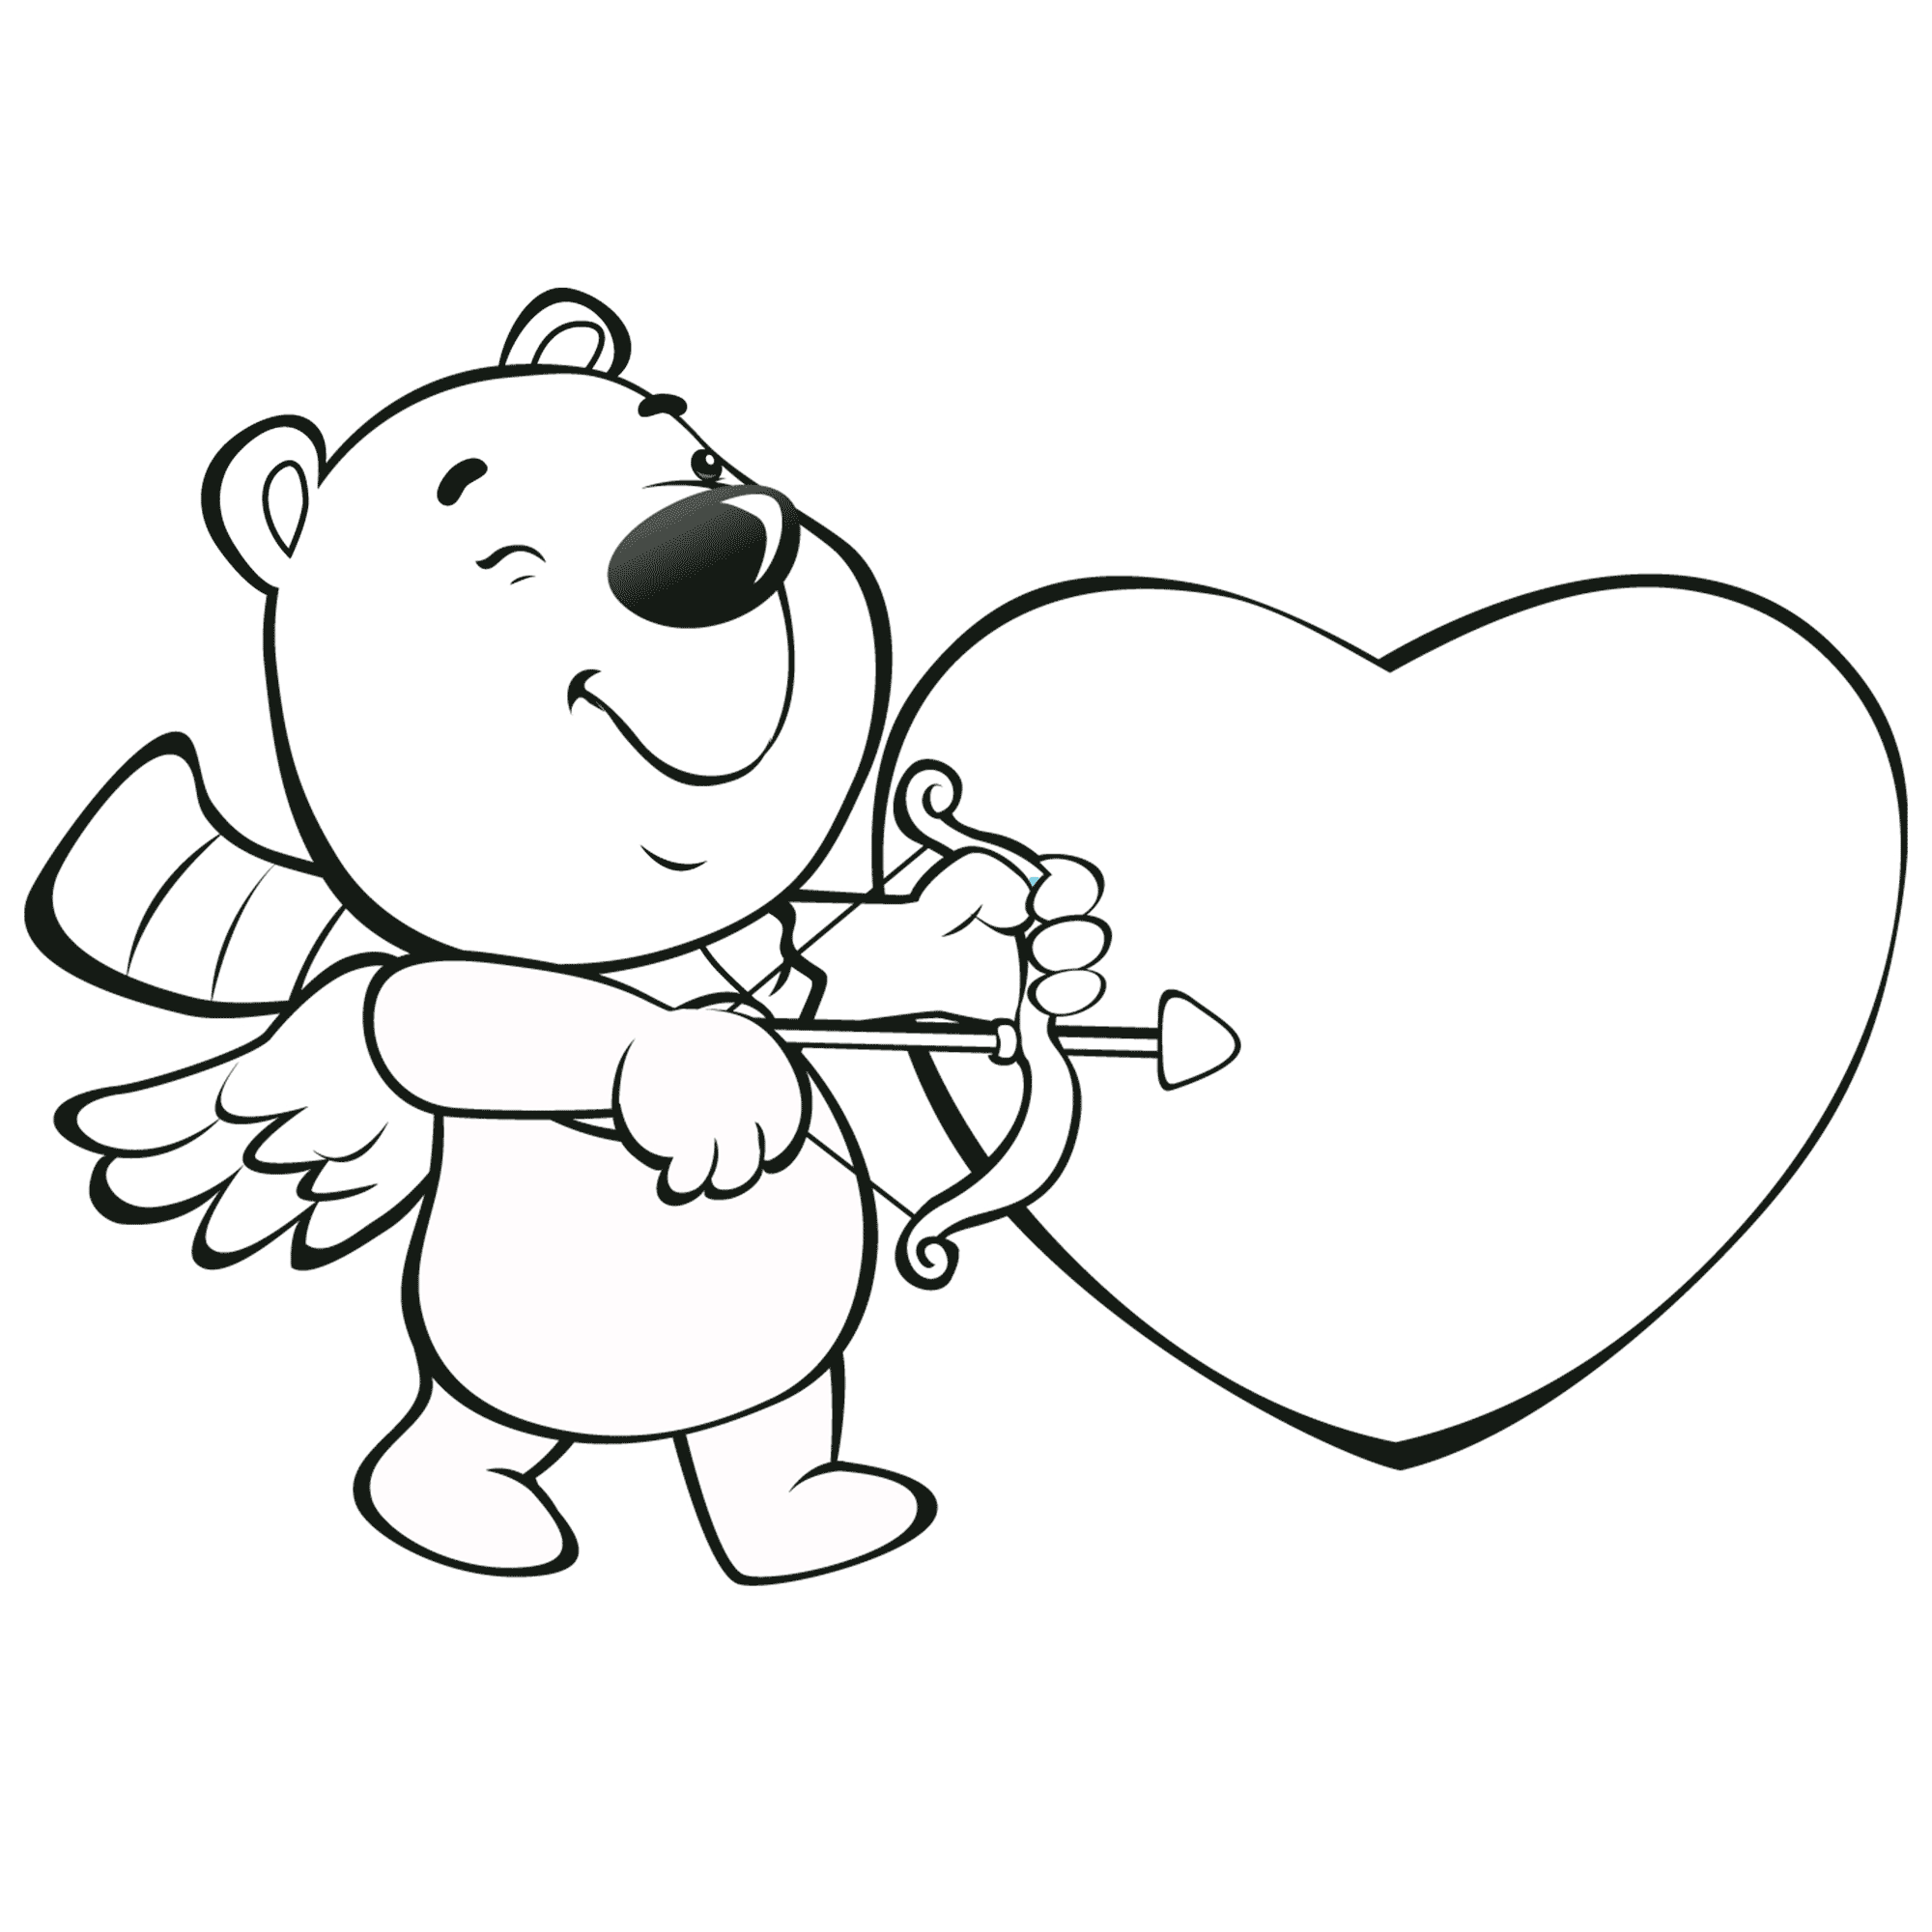 Valentine Heart Coloring Pages - Best Coloring Pages For Kids